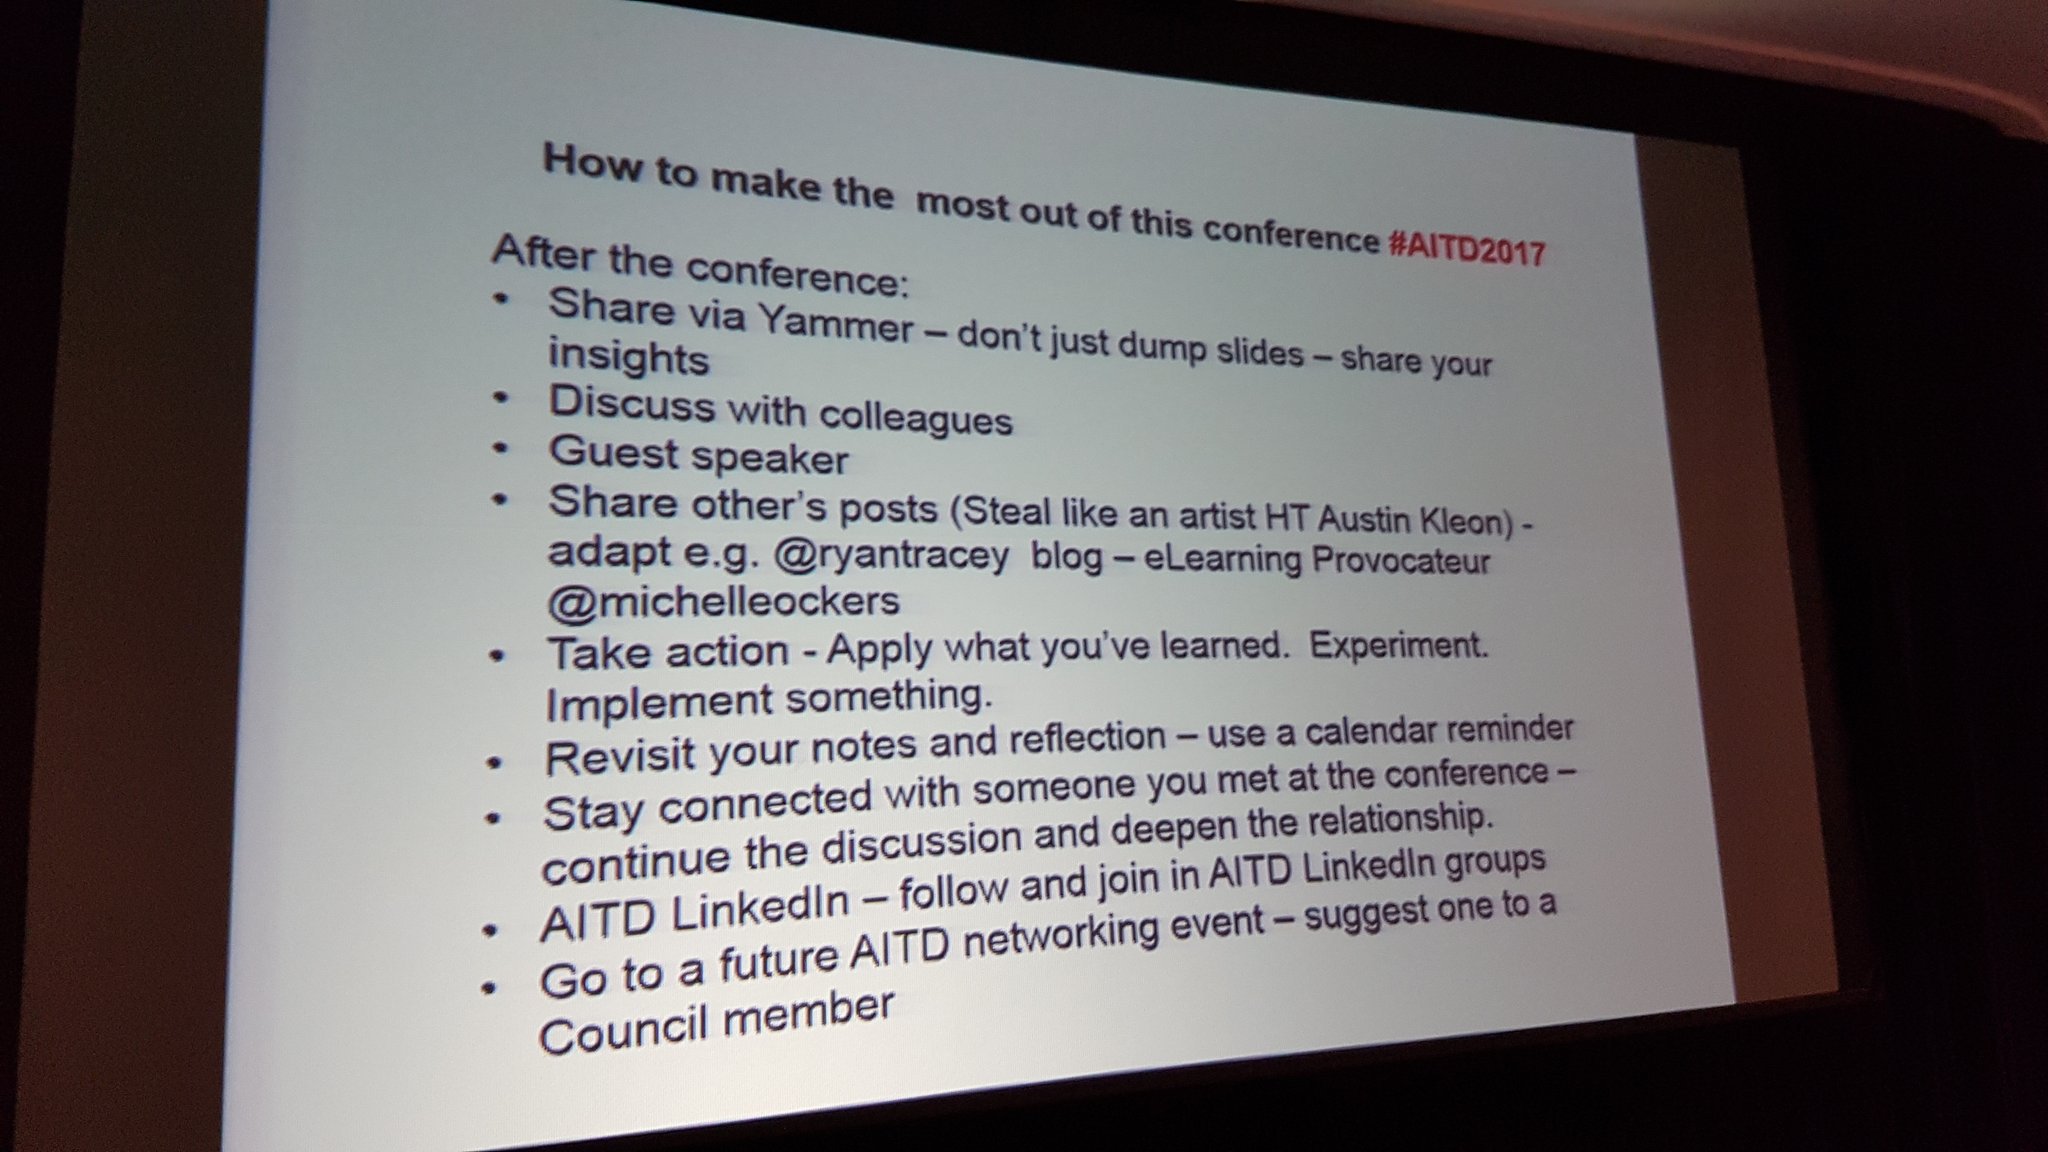 Crowdsourced tips for how to make the most out of this conference.